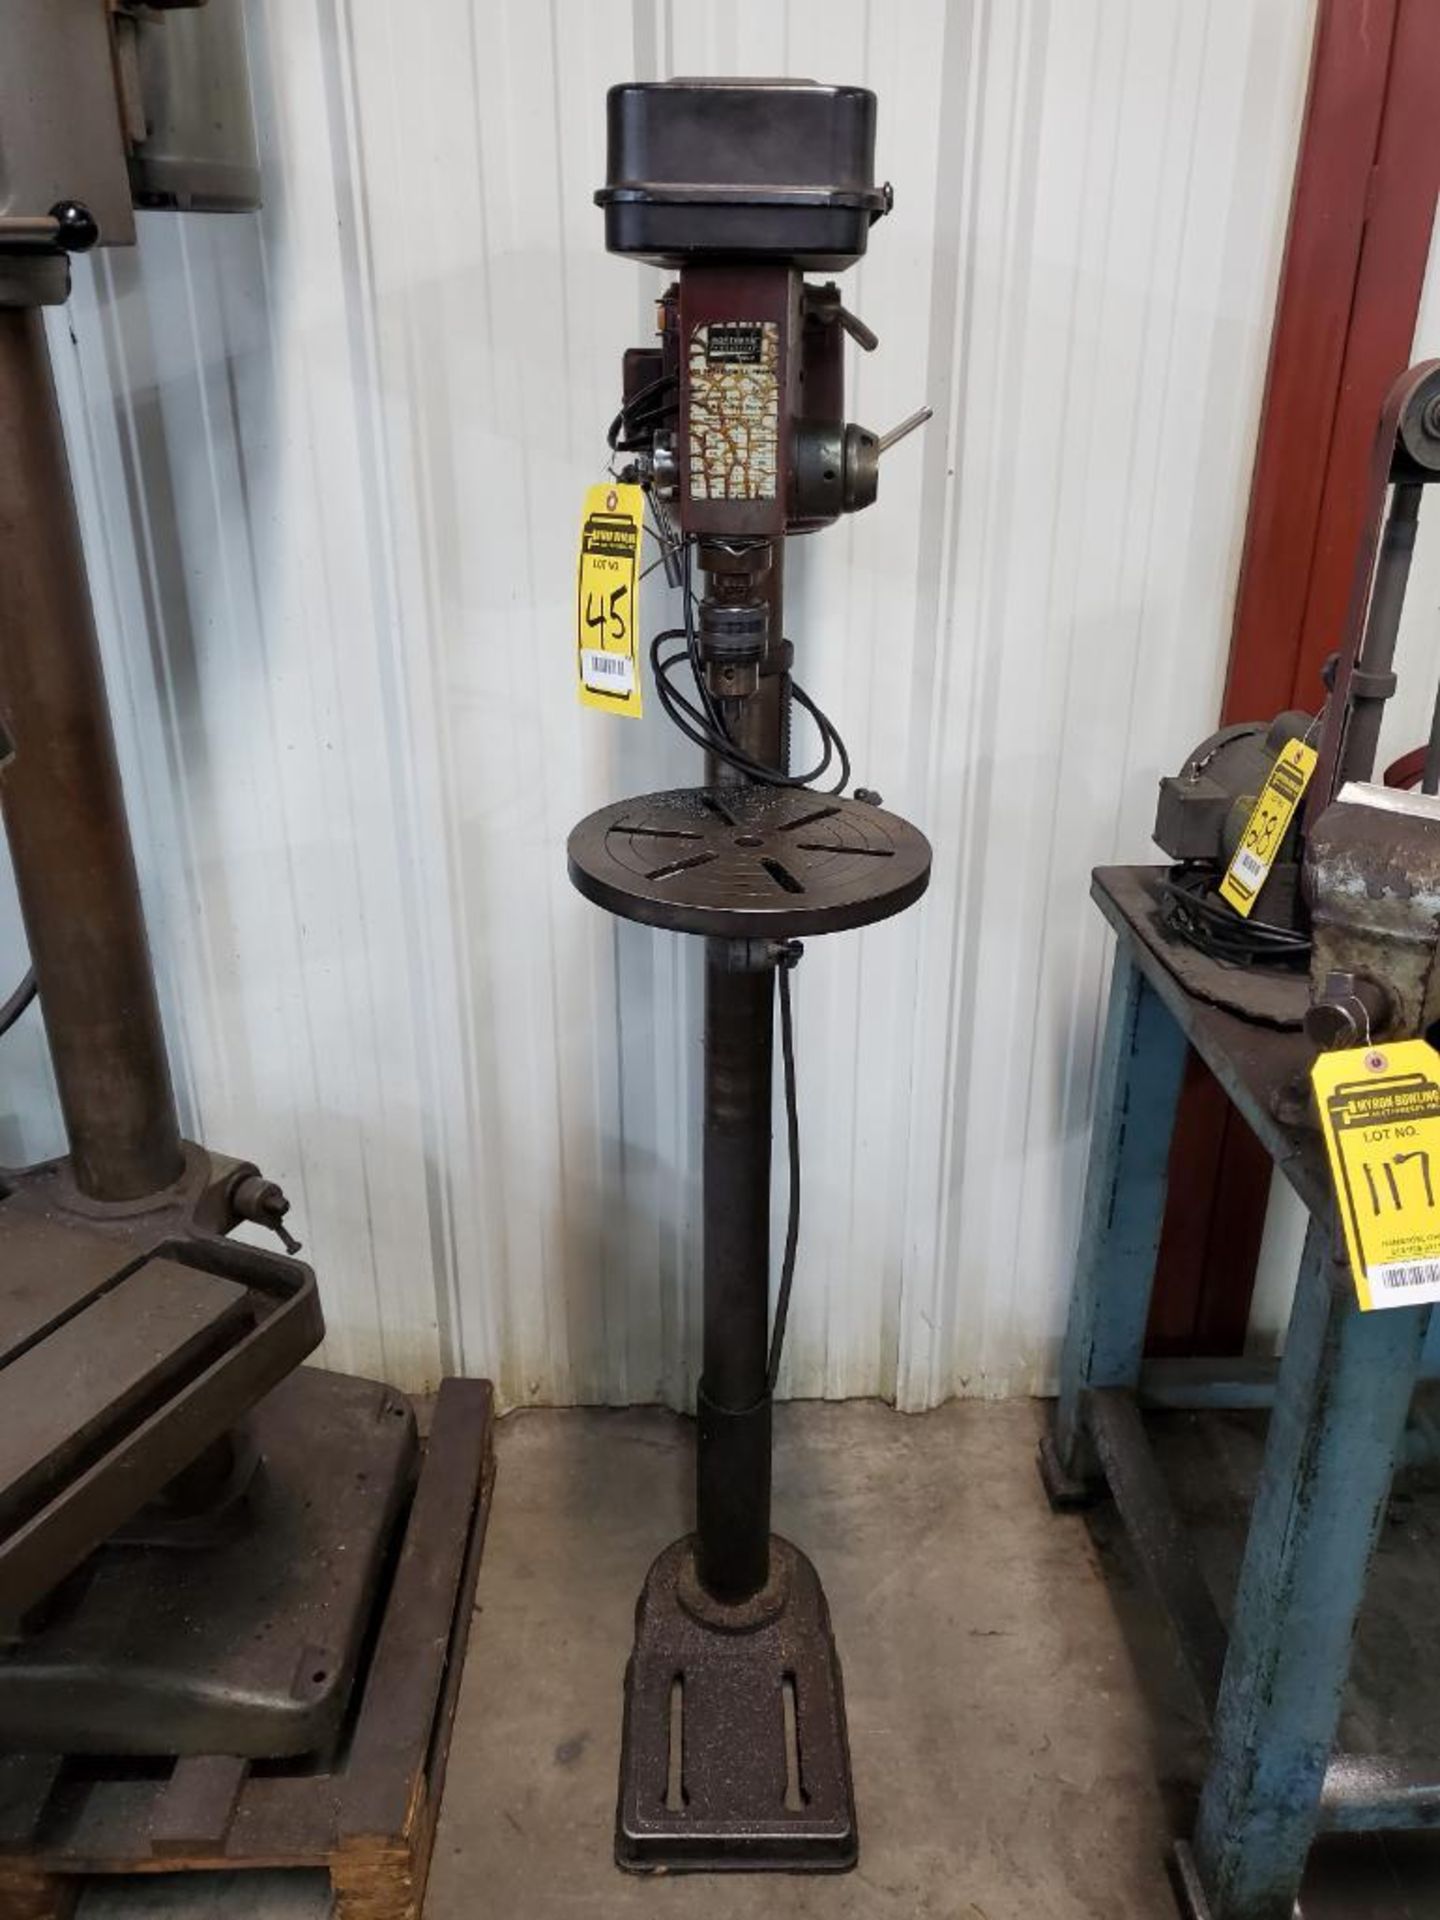 NORTHERN 16-SPEED VERTICAL FLOOR DRILL PRESS, 11-1/4'' DIA TABLE, 200-3850 RPM, 5/8'' MAX DRILLING